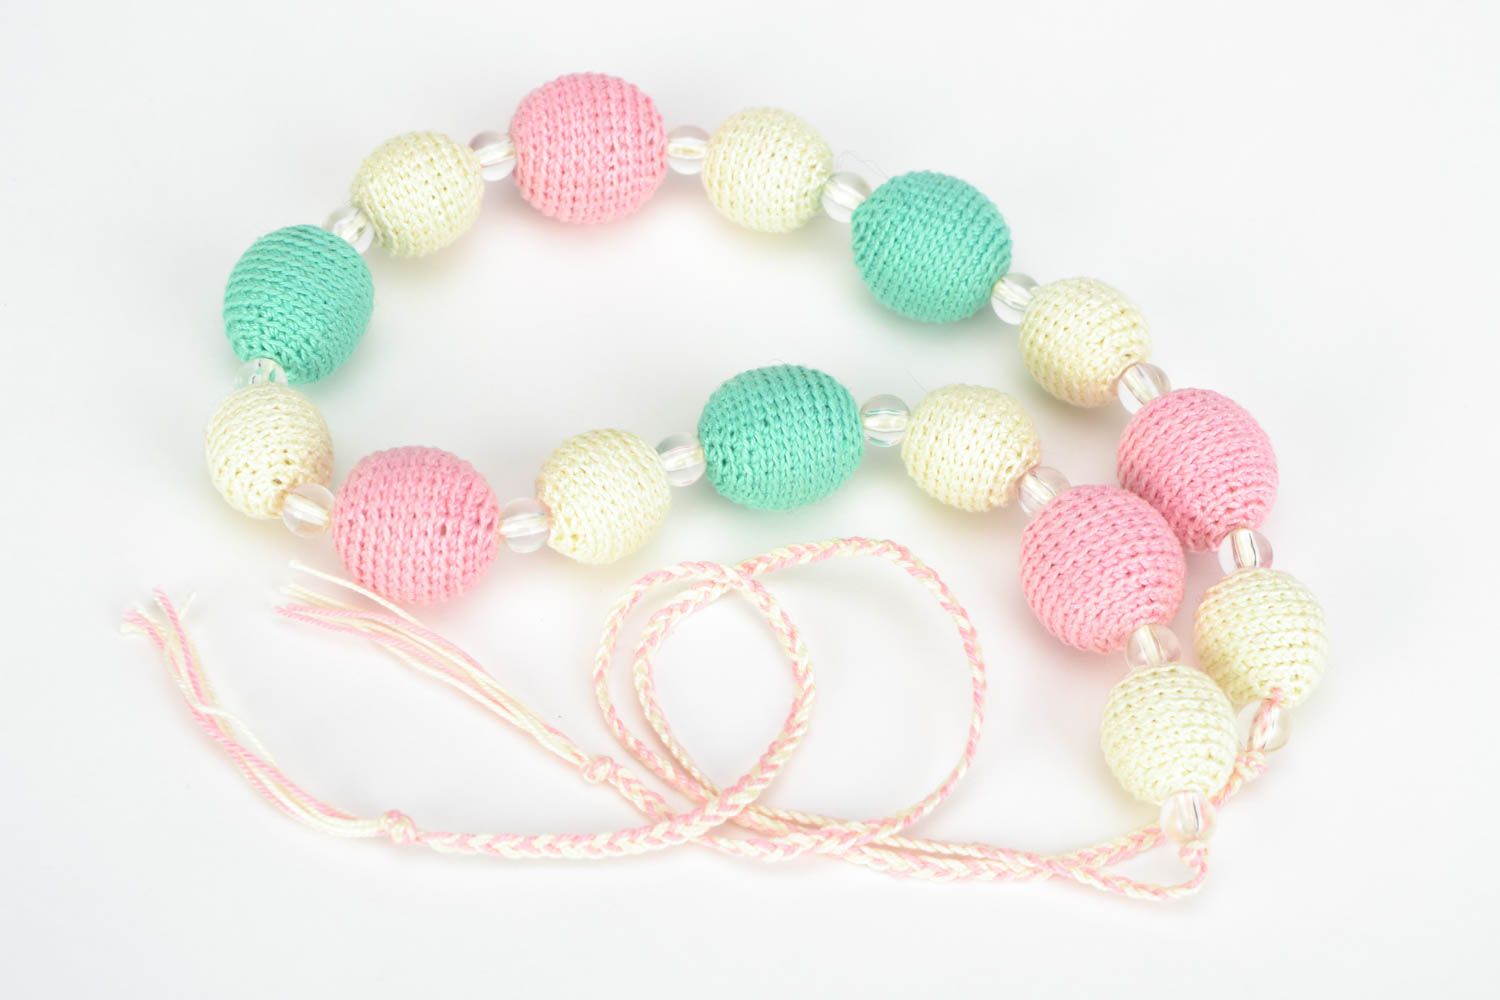 Gentle unusual handmade colorful crochet ball necklace with ties photo 4